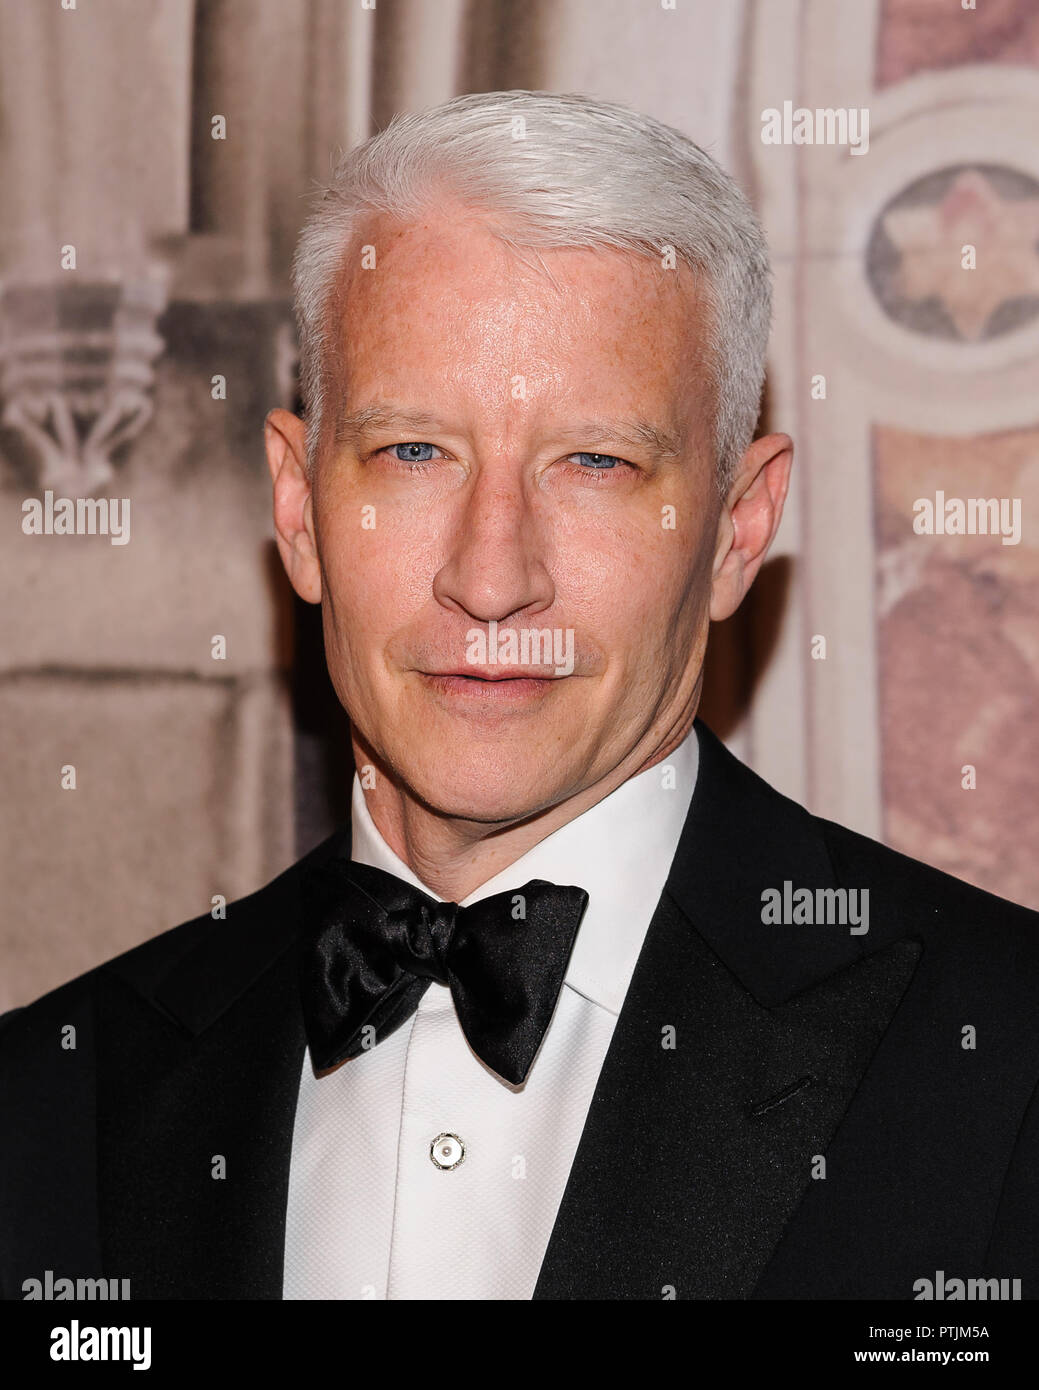 Anderson cooper ralph lauren hi-res stock photography and images - Alamy